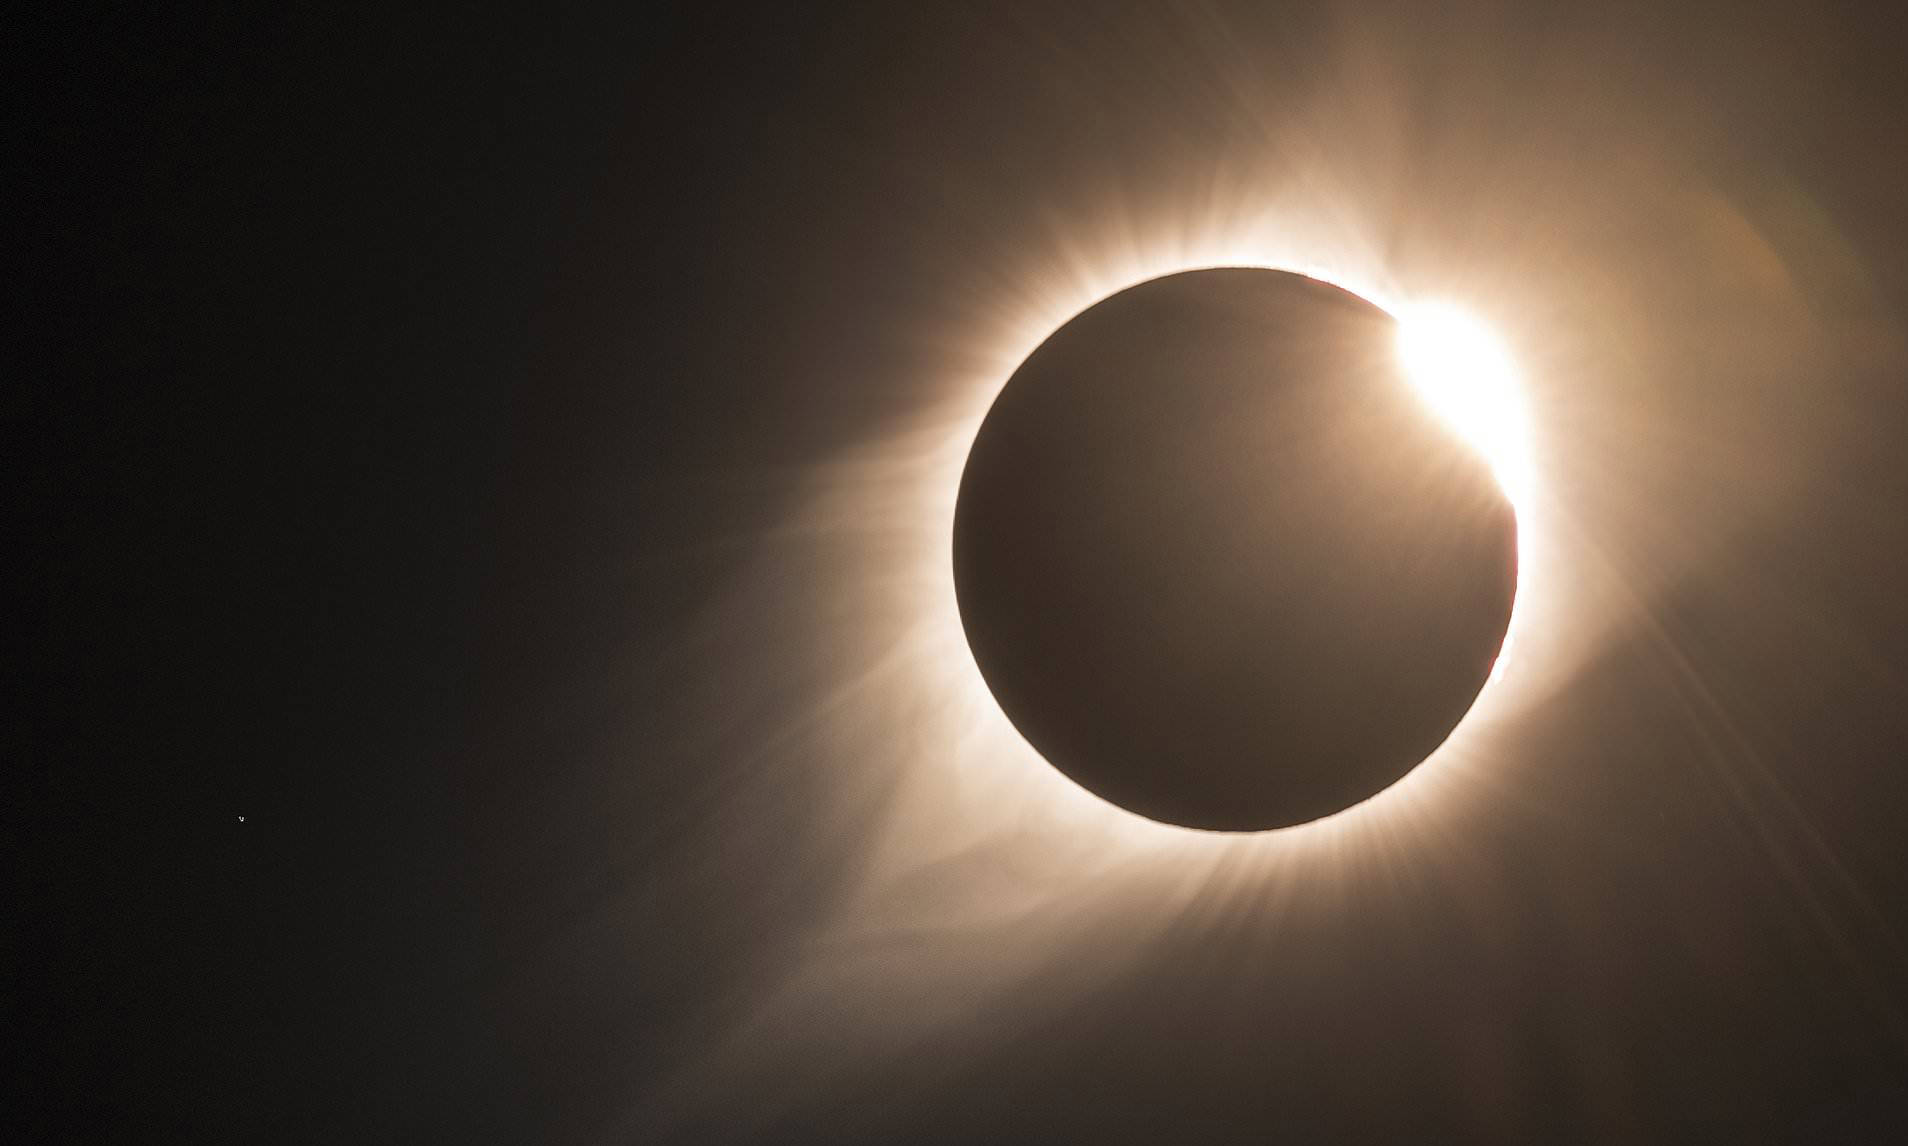 Tomorrow's total solar eclipse that only occurs once a lifetime will